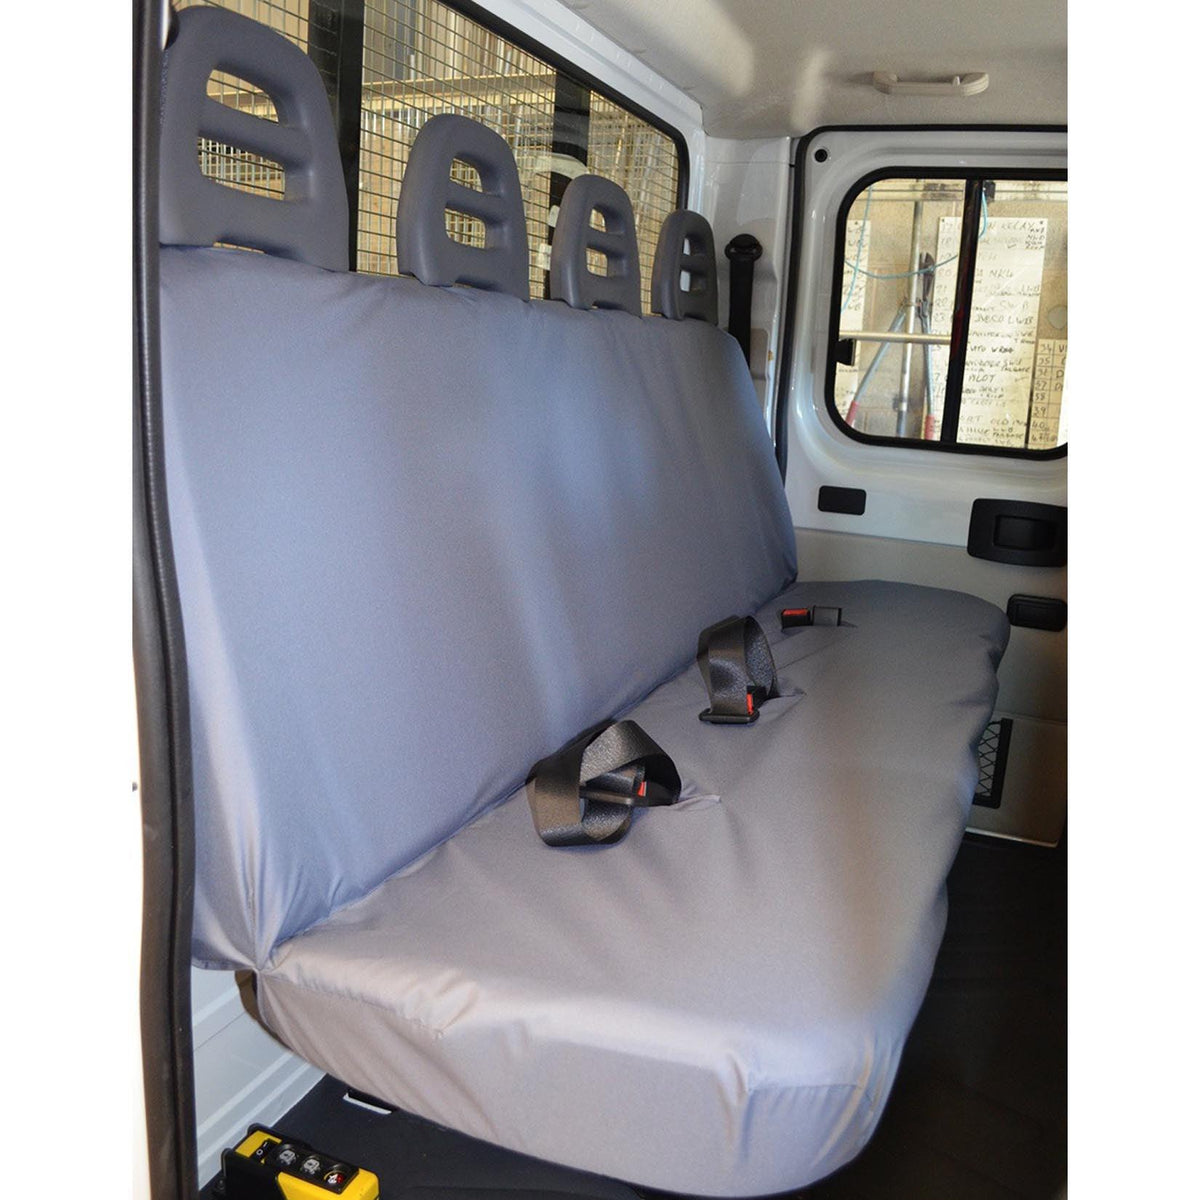 CITROEN RELAY VAN 2006-2022 - CHASSIS CAB REAR SEAT COVERS - GREY - Storm Xccessories2